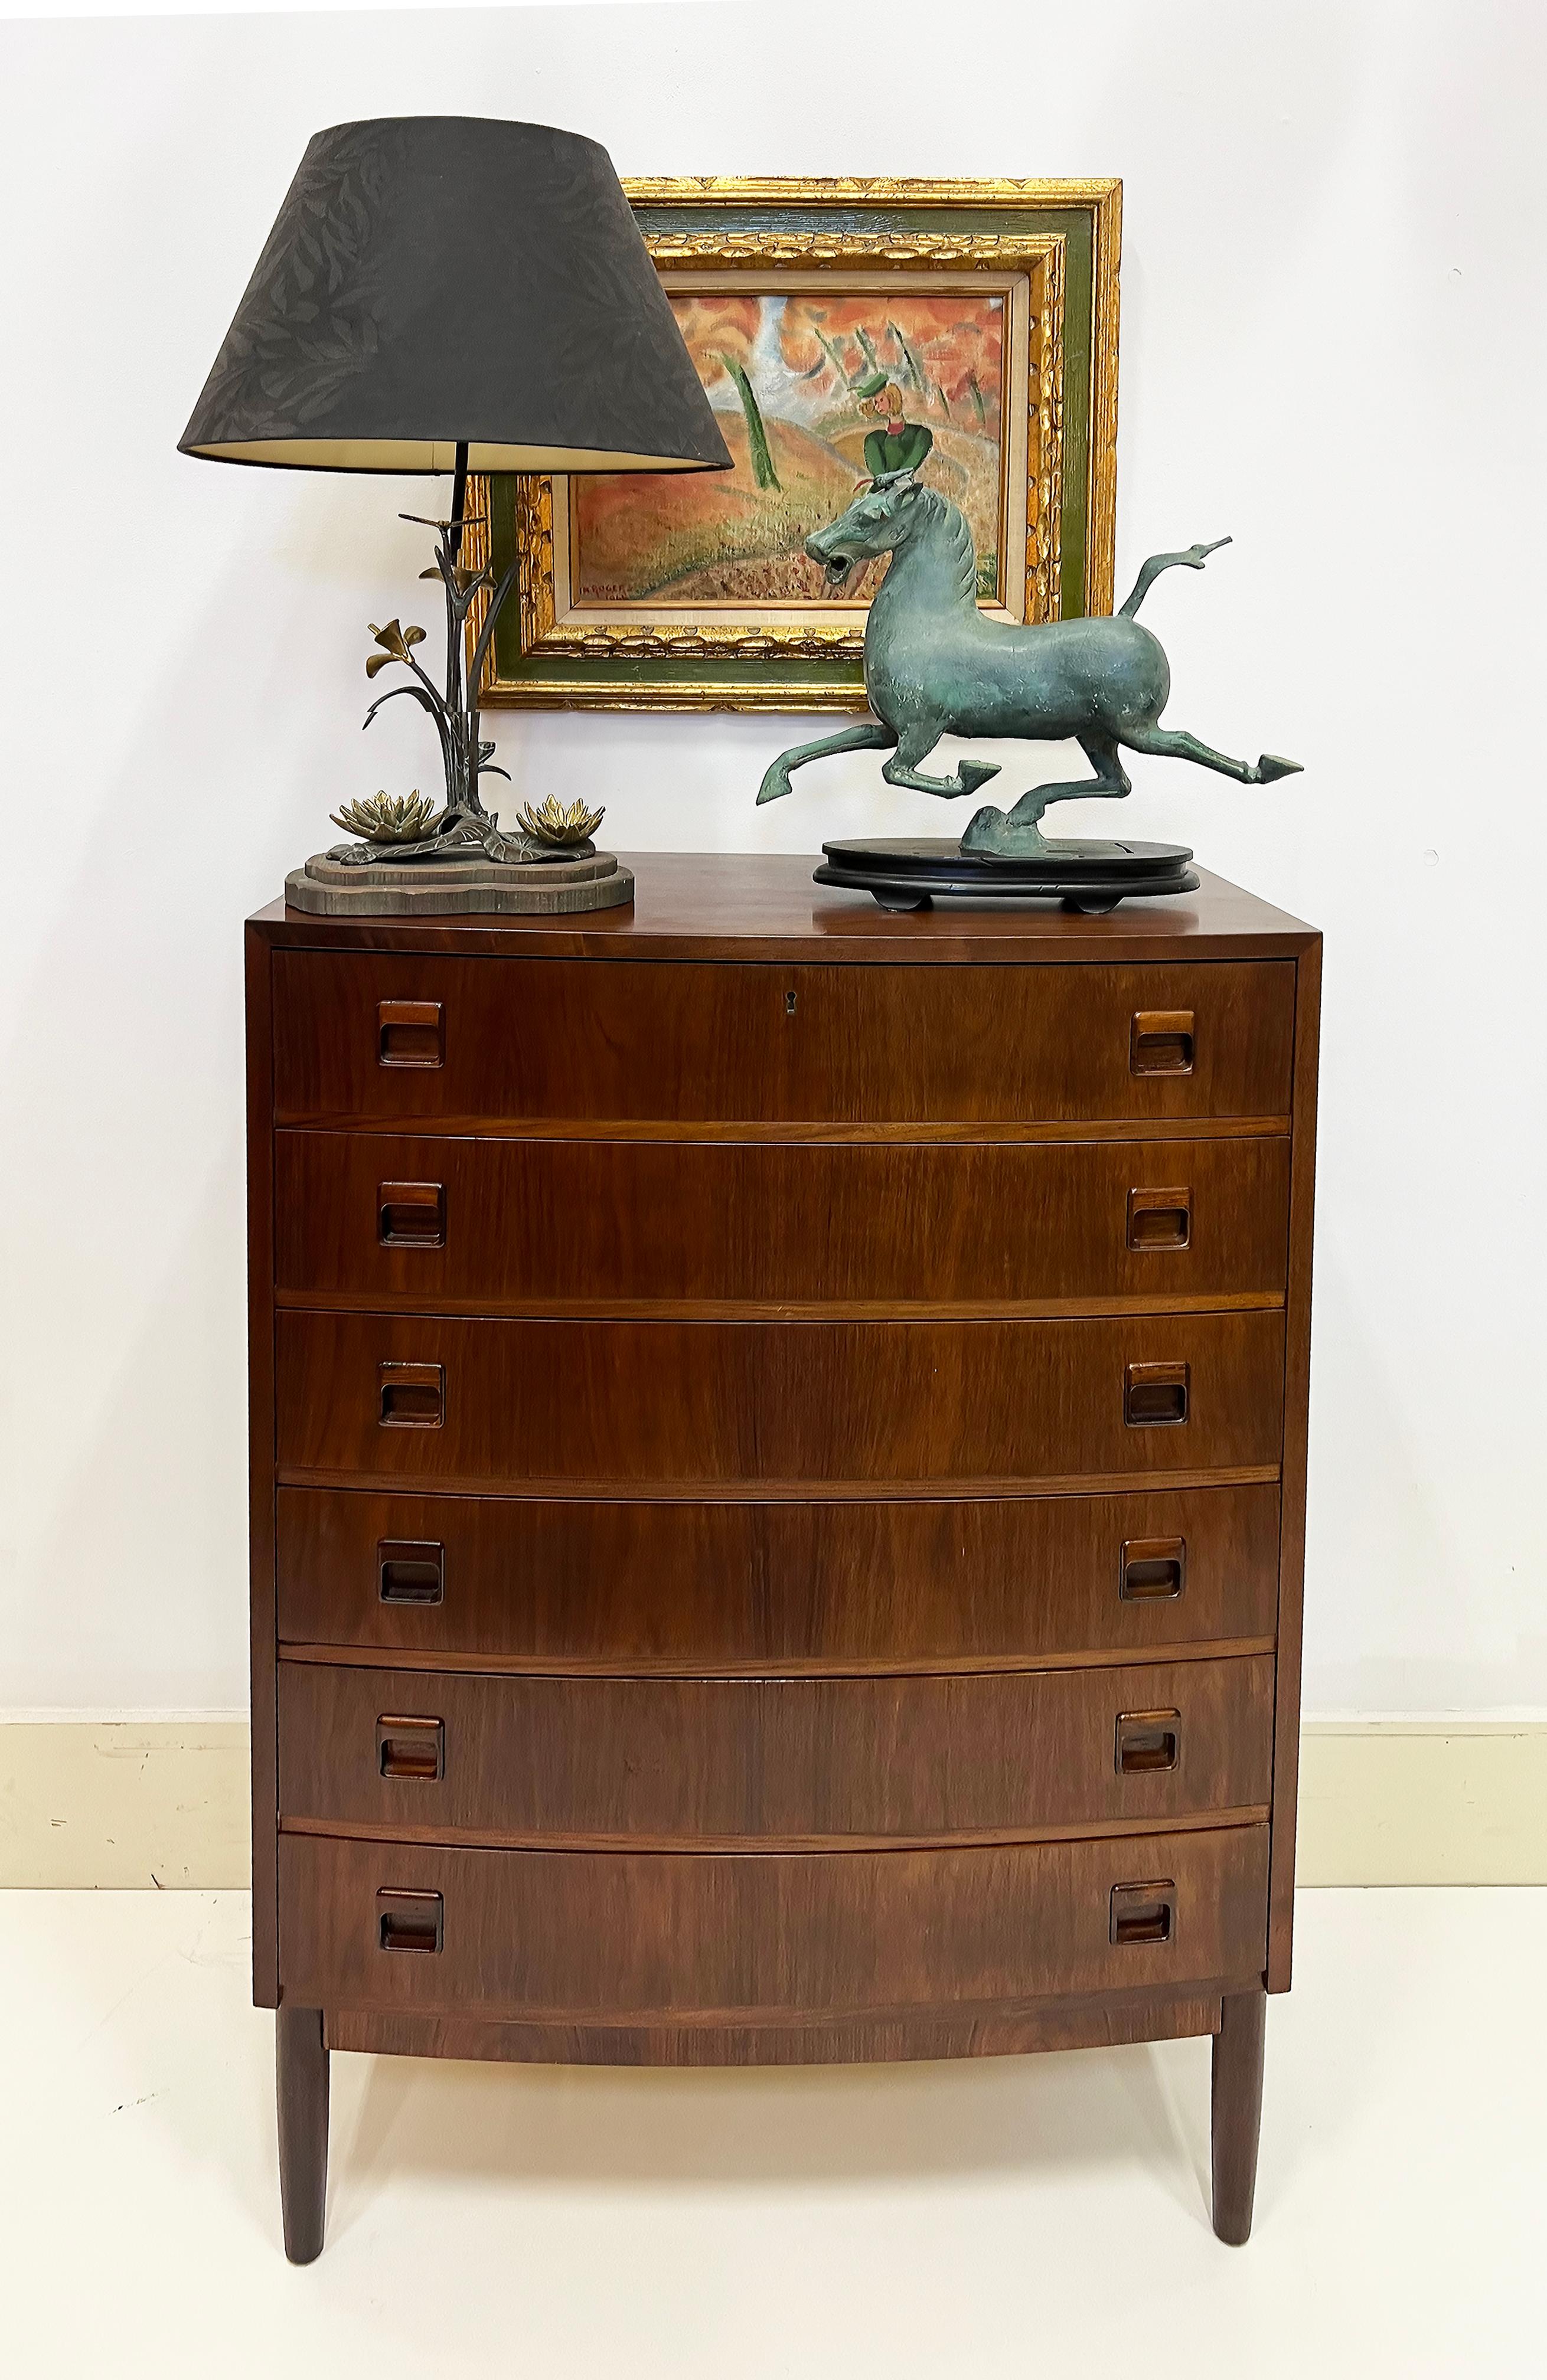 Danish Modern Kai Kristiansen Brazilian Rosewood Tall Chest of Drawers

Offered for sale is a vintage Danish Modern tall or high chest of drawers by Kai Kristiansen with a slight bow front. The chest is made with beautifully grained Brazilian